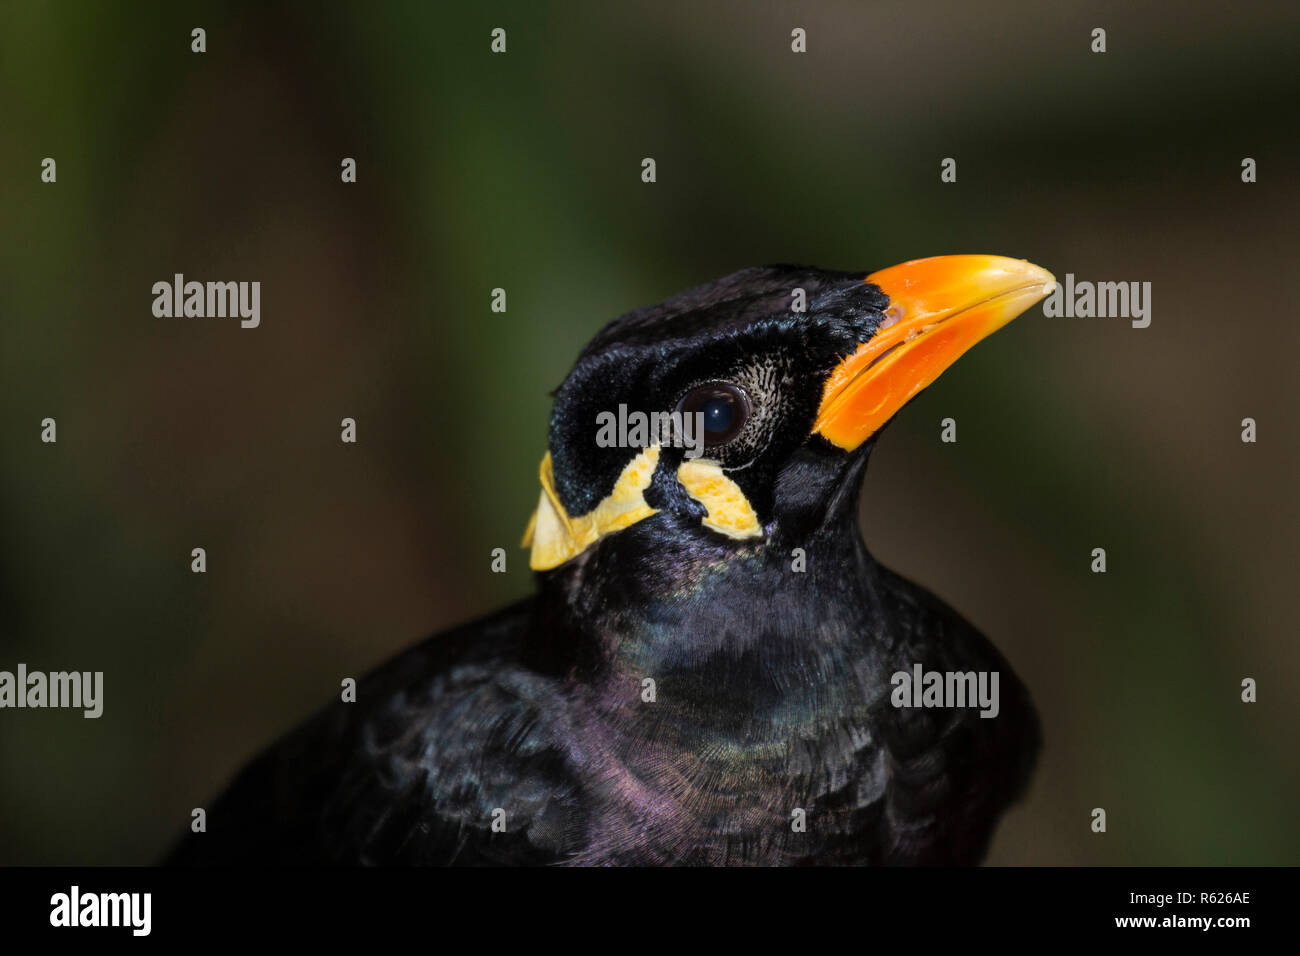 Close up of looking up Nias Hill Myna (Gracula robusta), an intelligent talking Beo bird on a natural green brown blurred background. Stock Photo